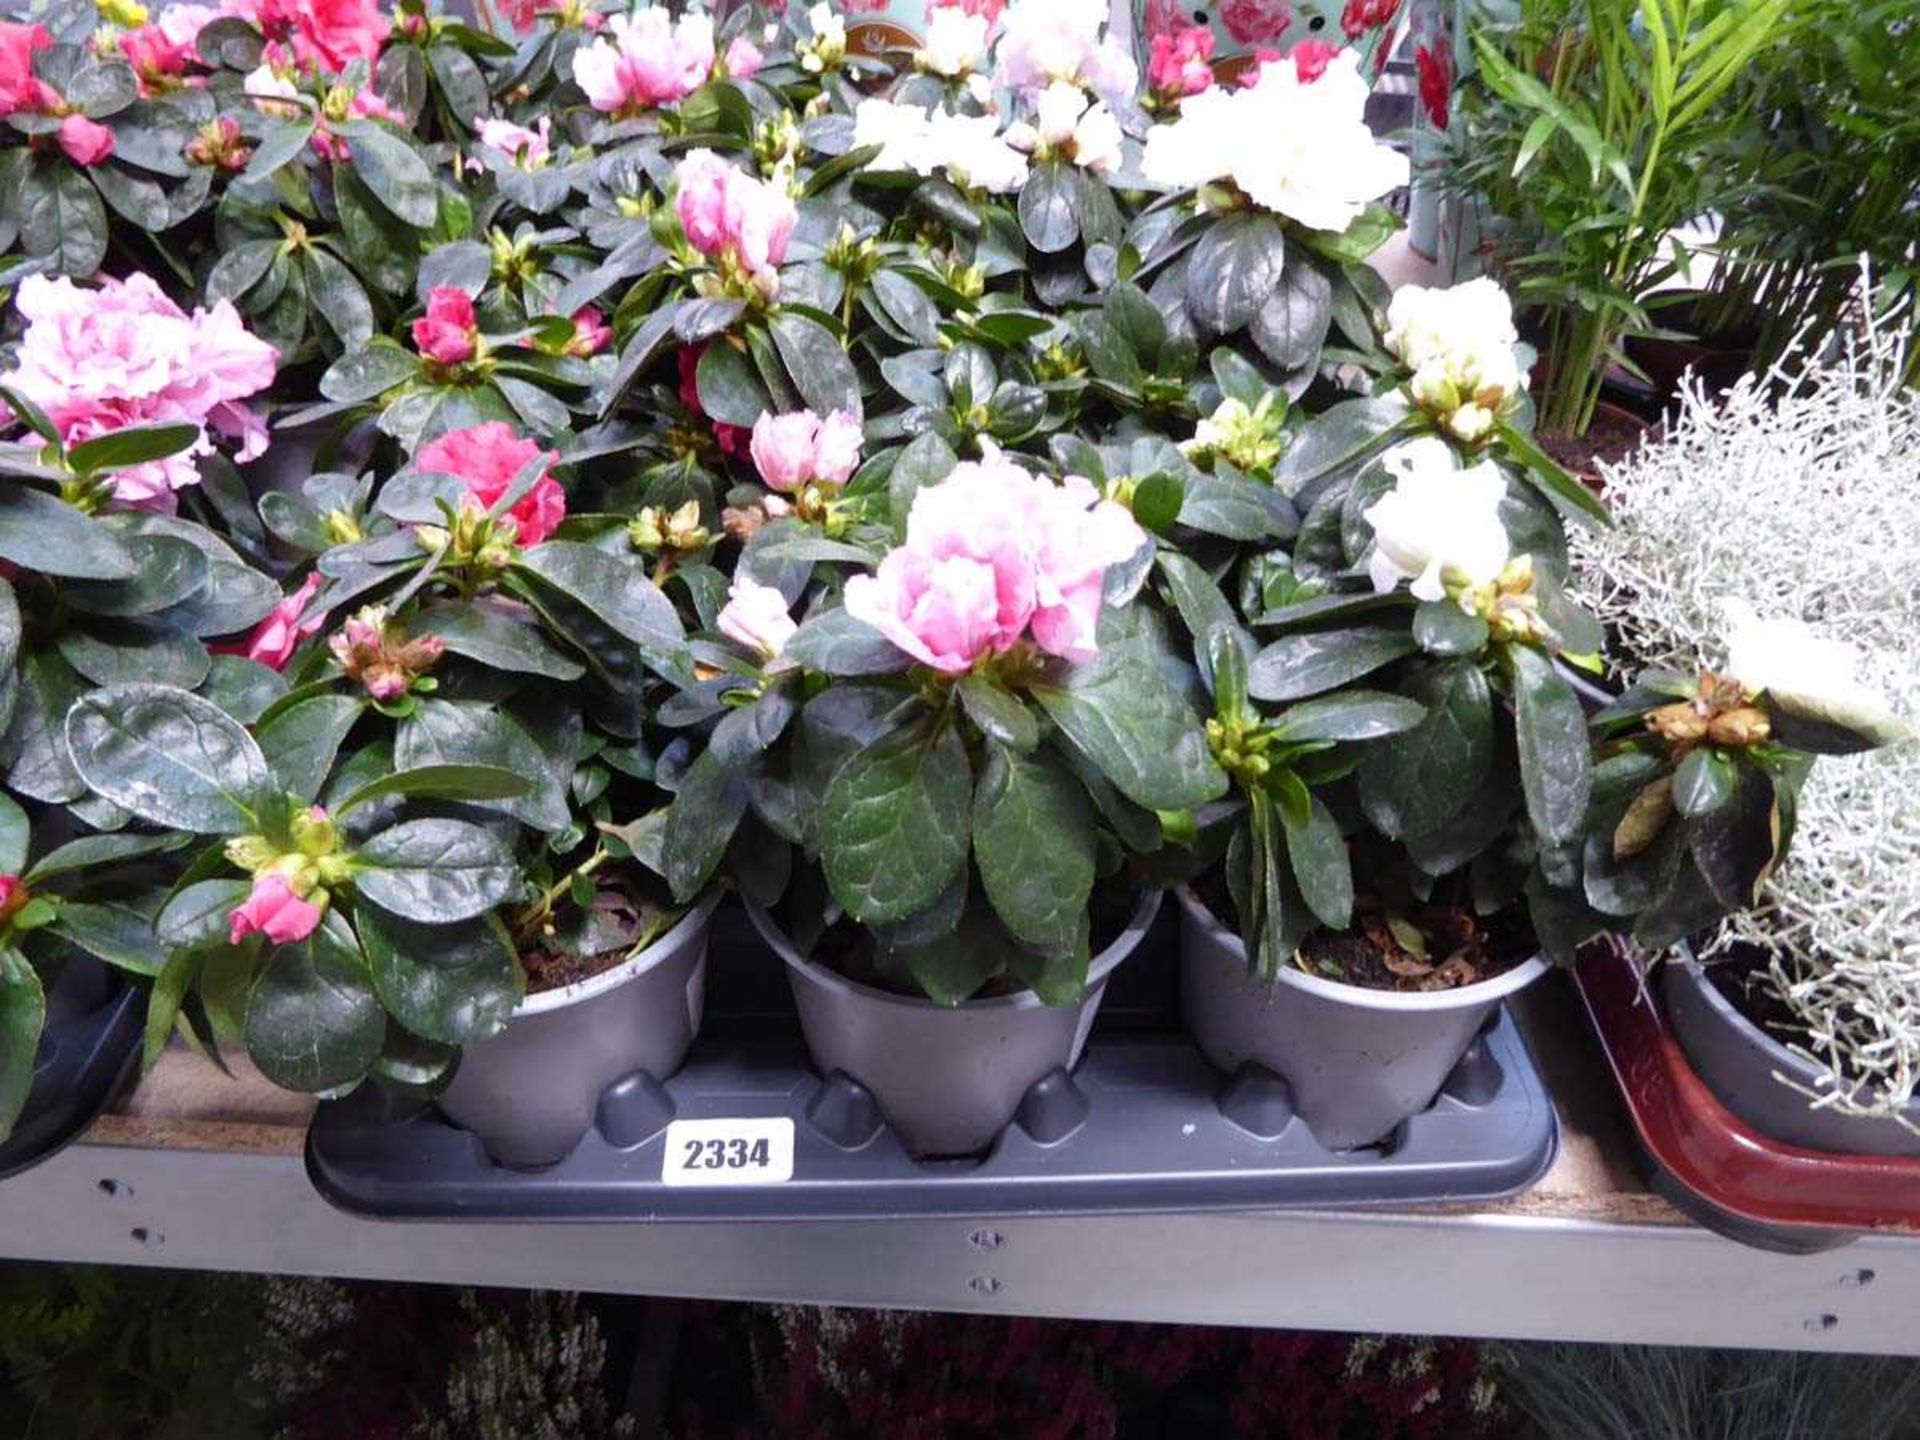 Large tray containing 6 potted rhododendrons